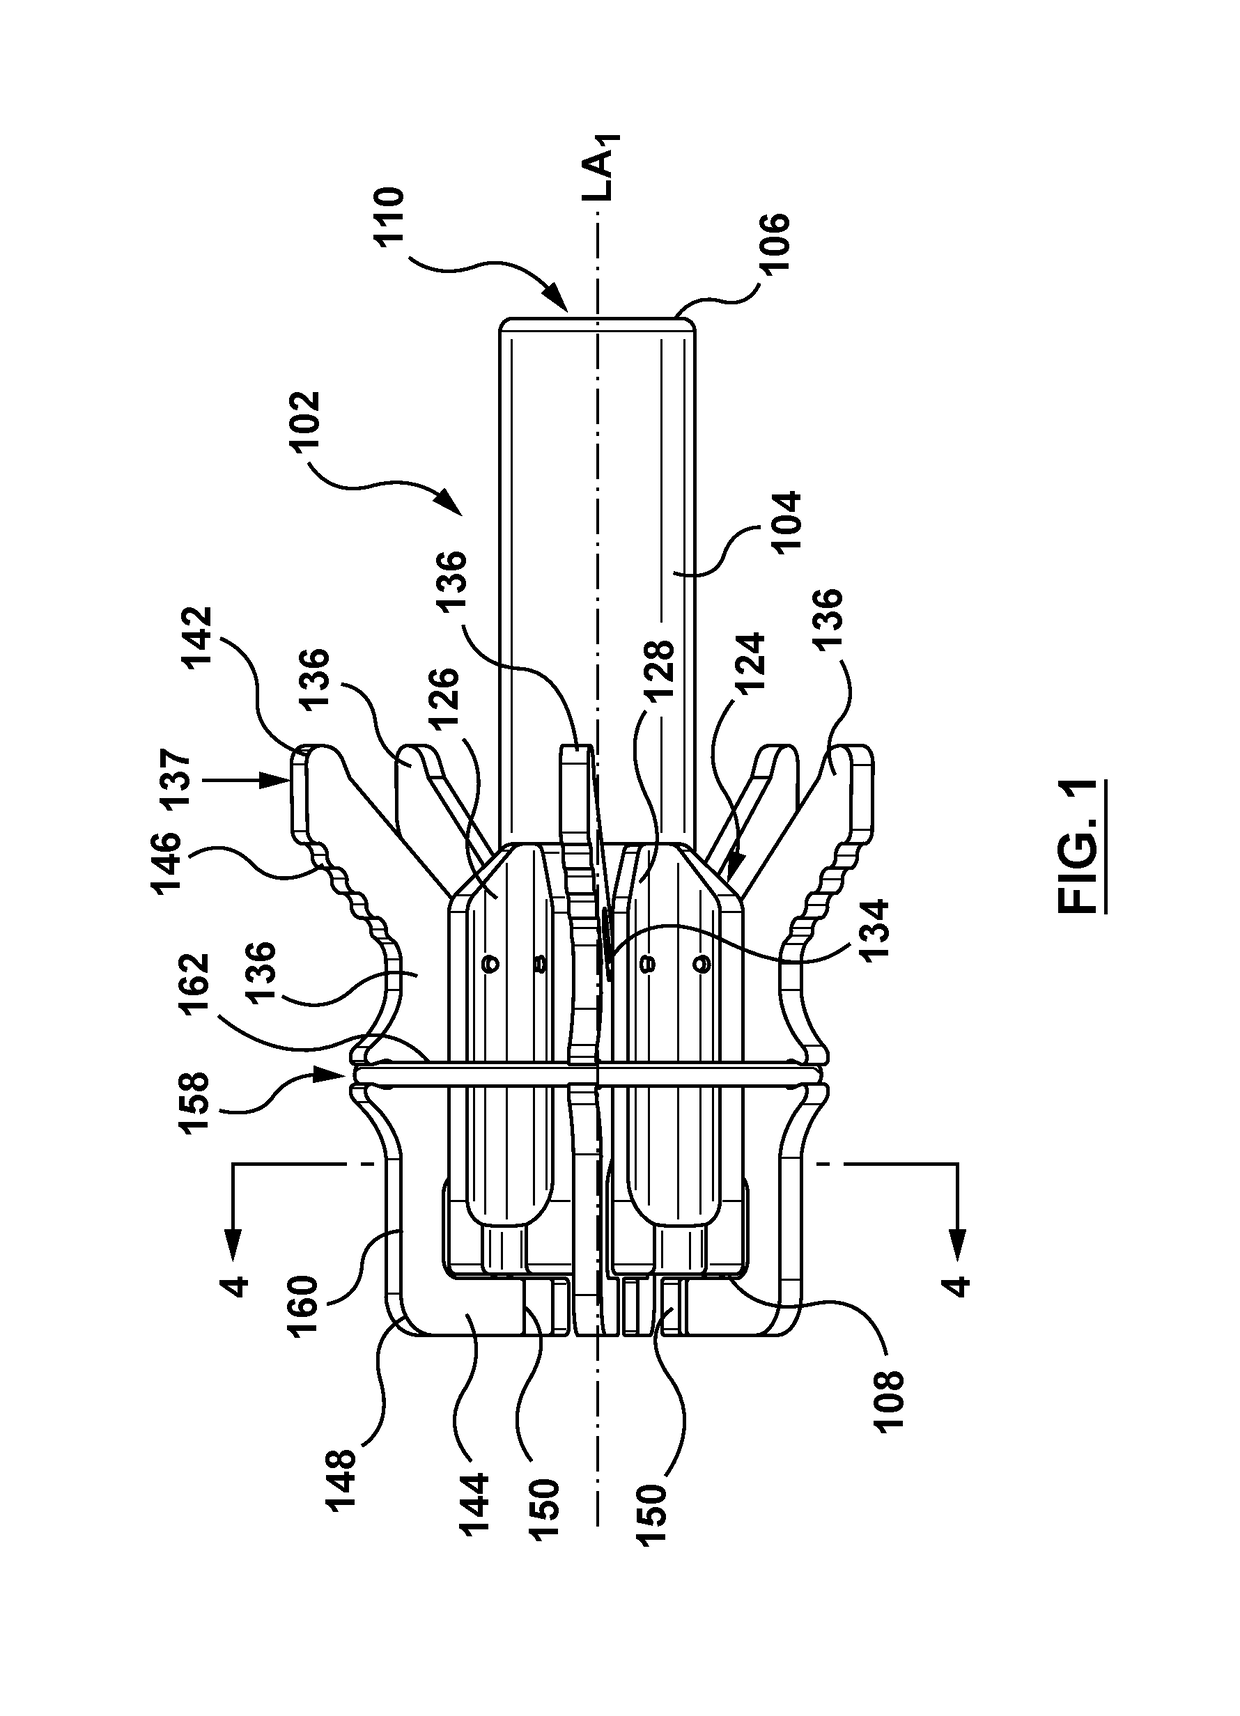 System for loading a transcatheter valve prosthesis into a delivery catheter